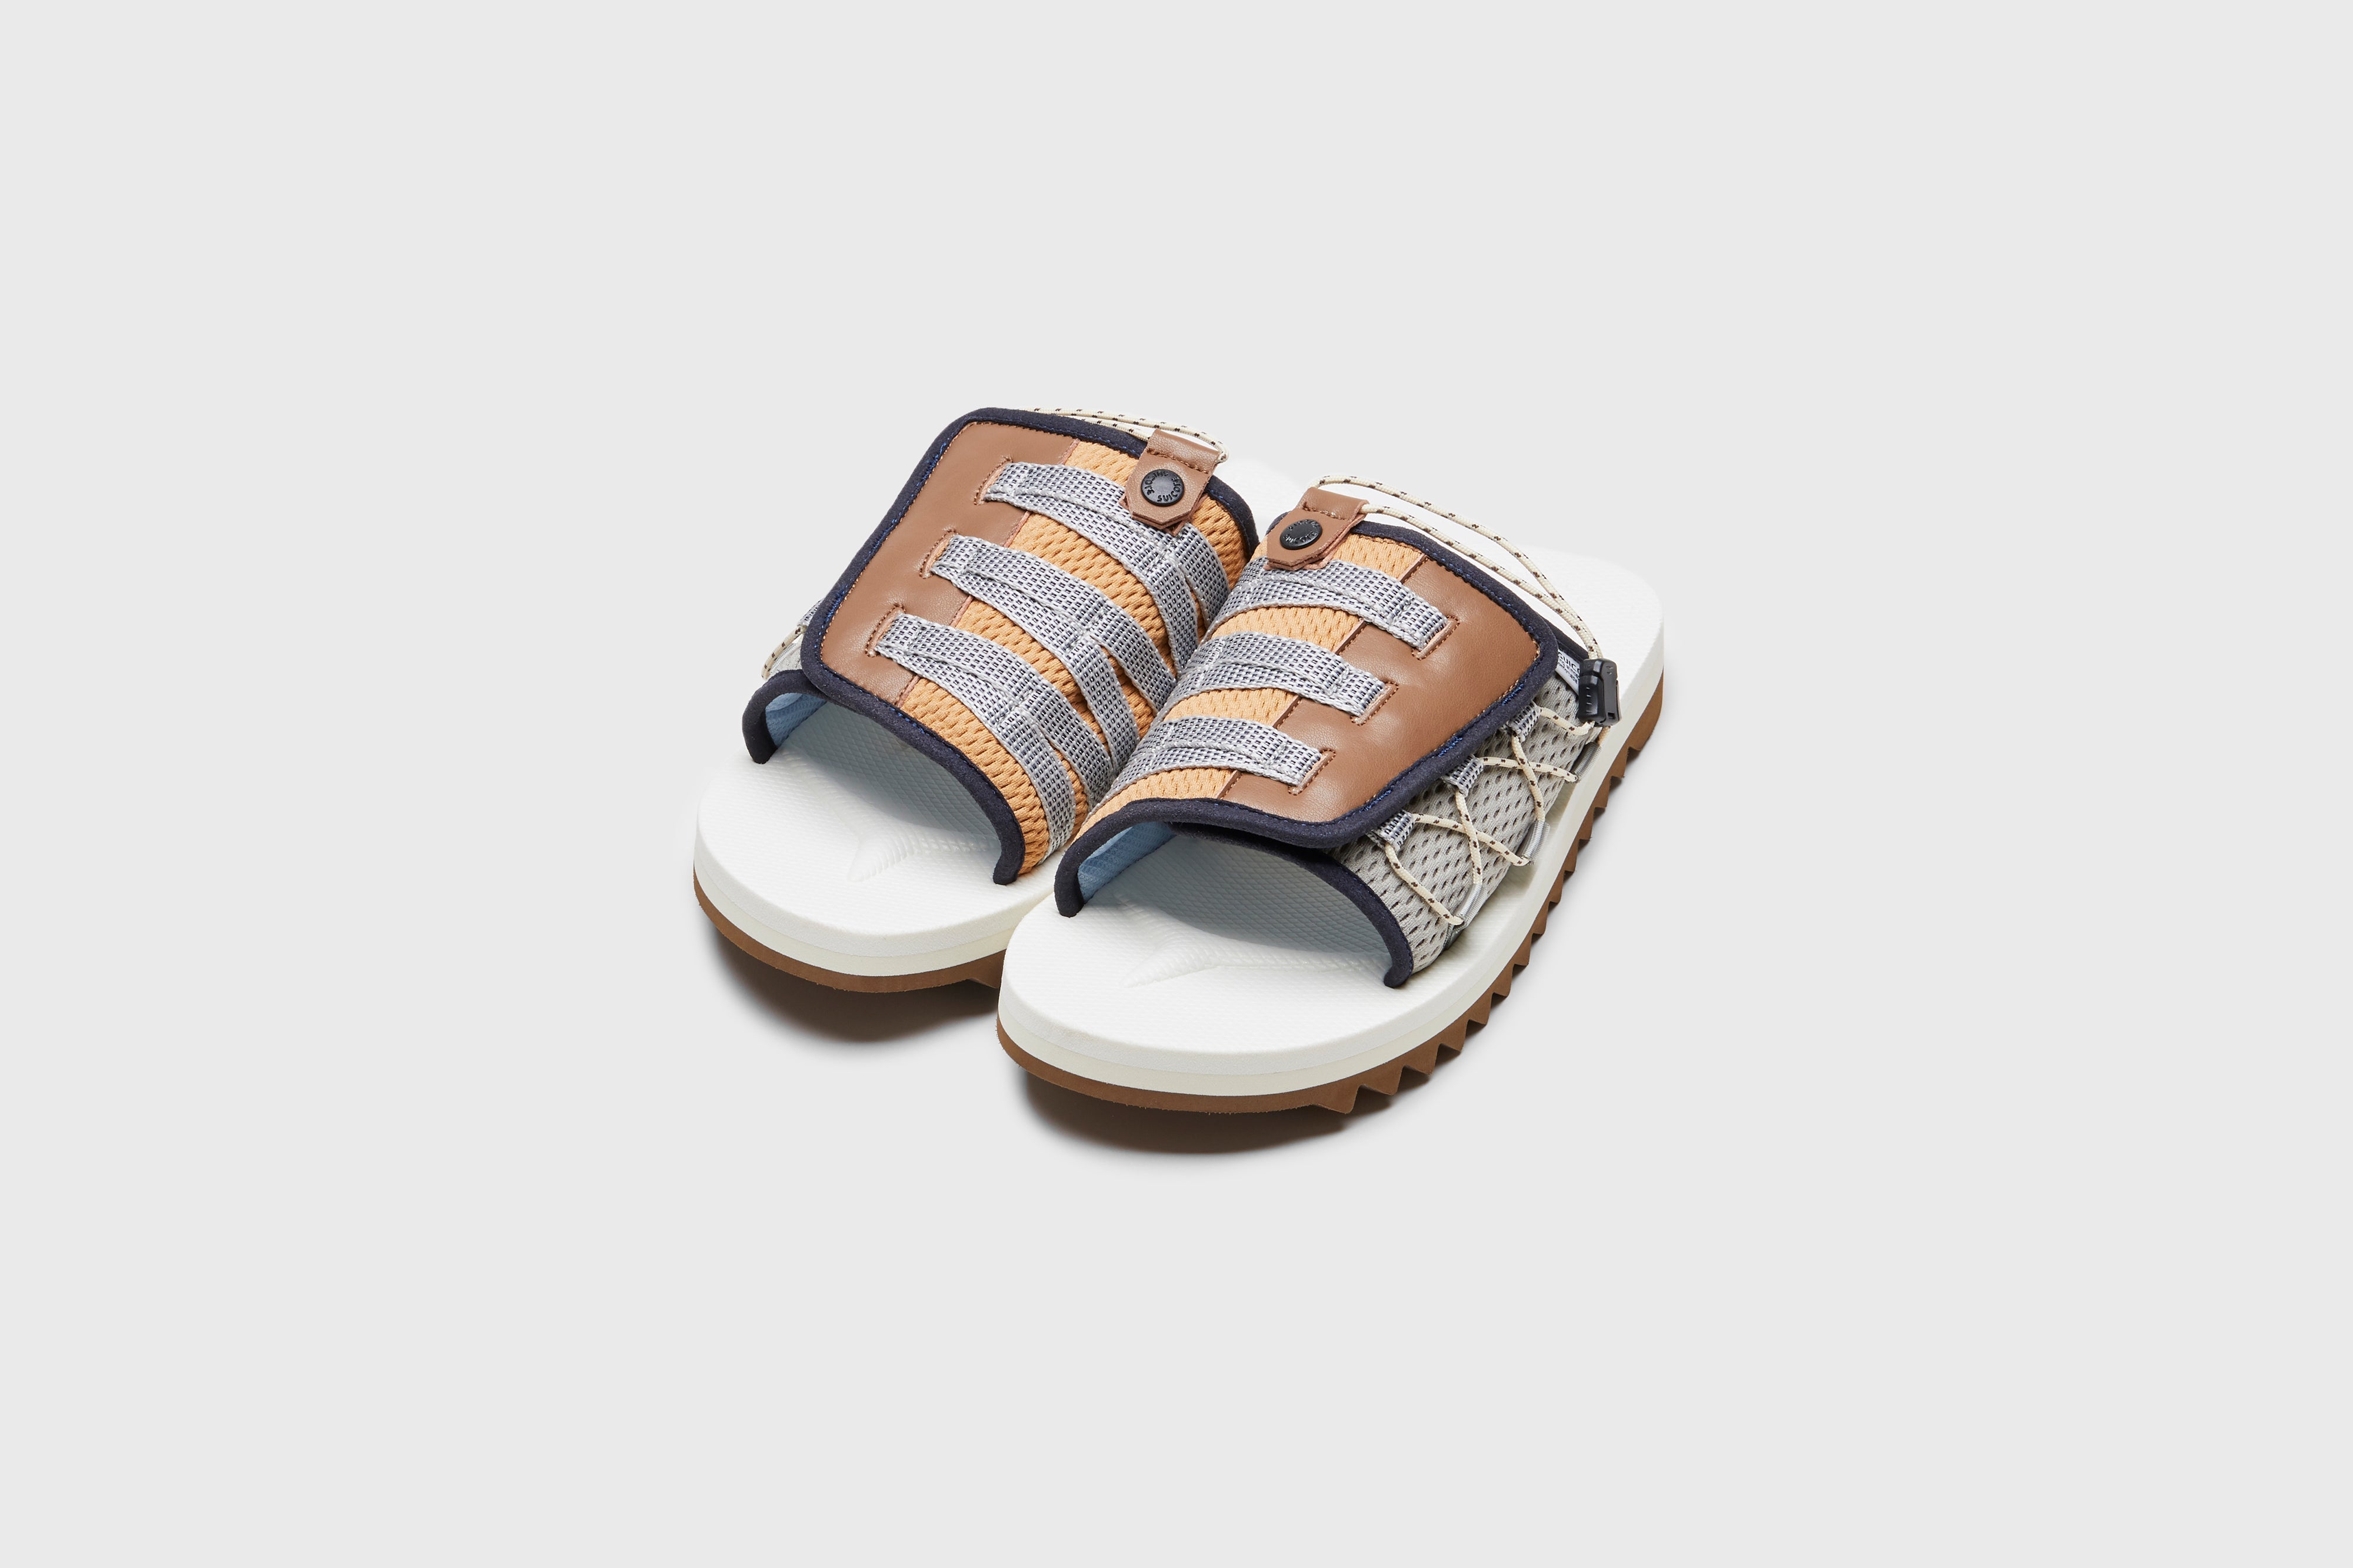 SUICOKE DAO-2AB slides with navy &amp; white nylon upper, navy &amp; white midsole and sole, strap and logo patch. From Spring/Summer 2023 collection on eightywingold Web Store, an official partner of SUICOKE. OG-195-2AB NAVY X WHITE